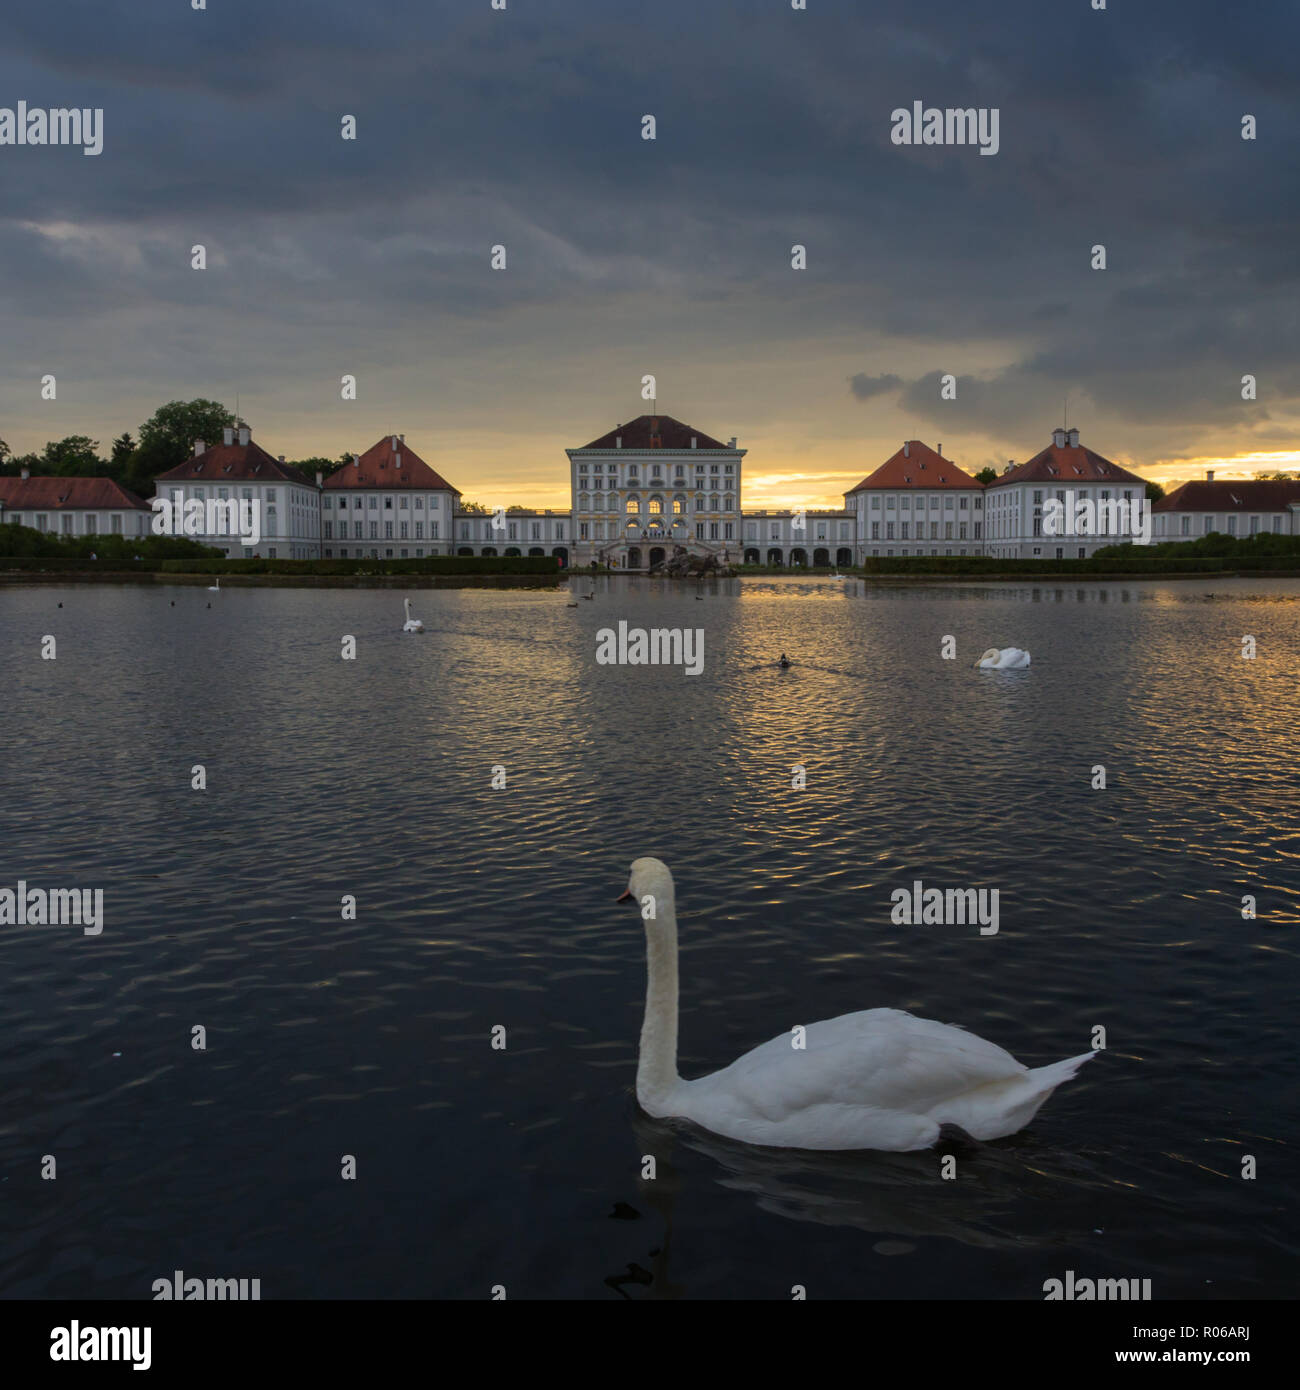 Dramatic scenery of post storm sunset of Nymphenburg palace in Munich Germany. Stock Photo